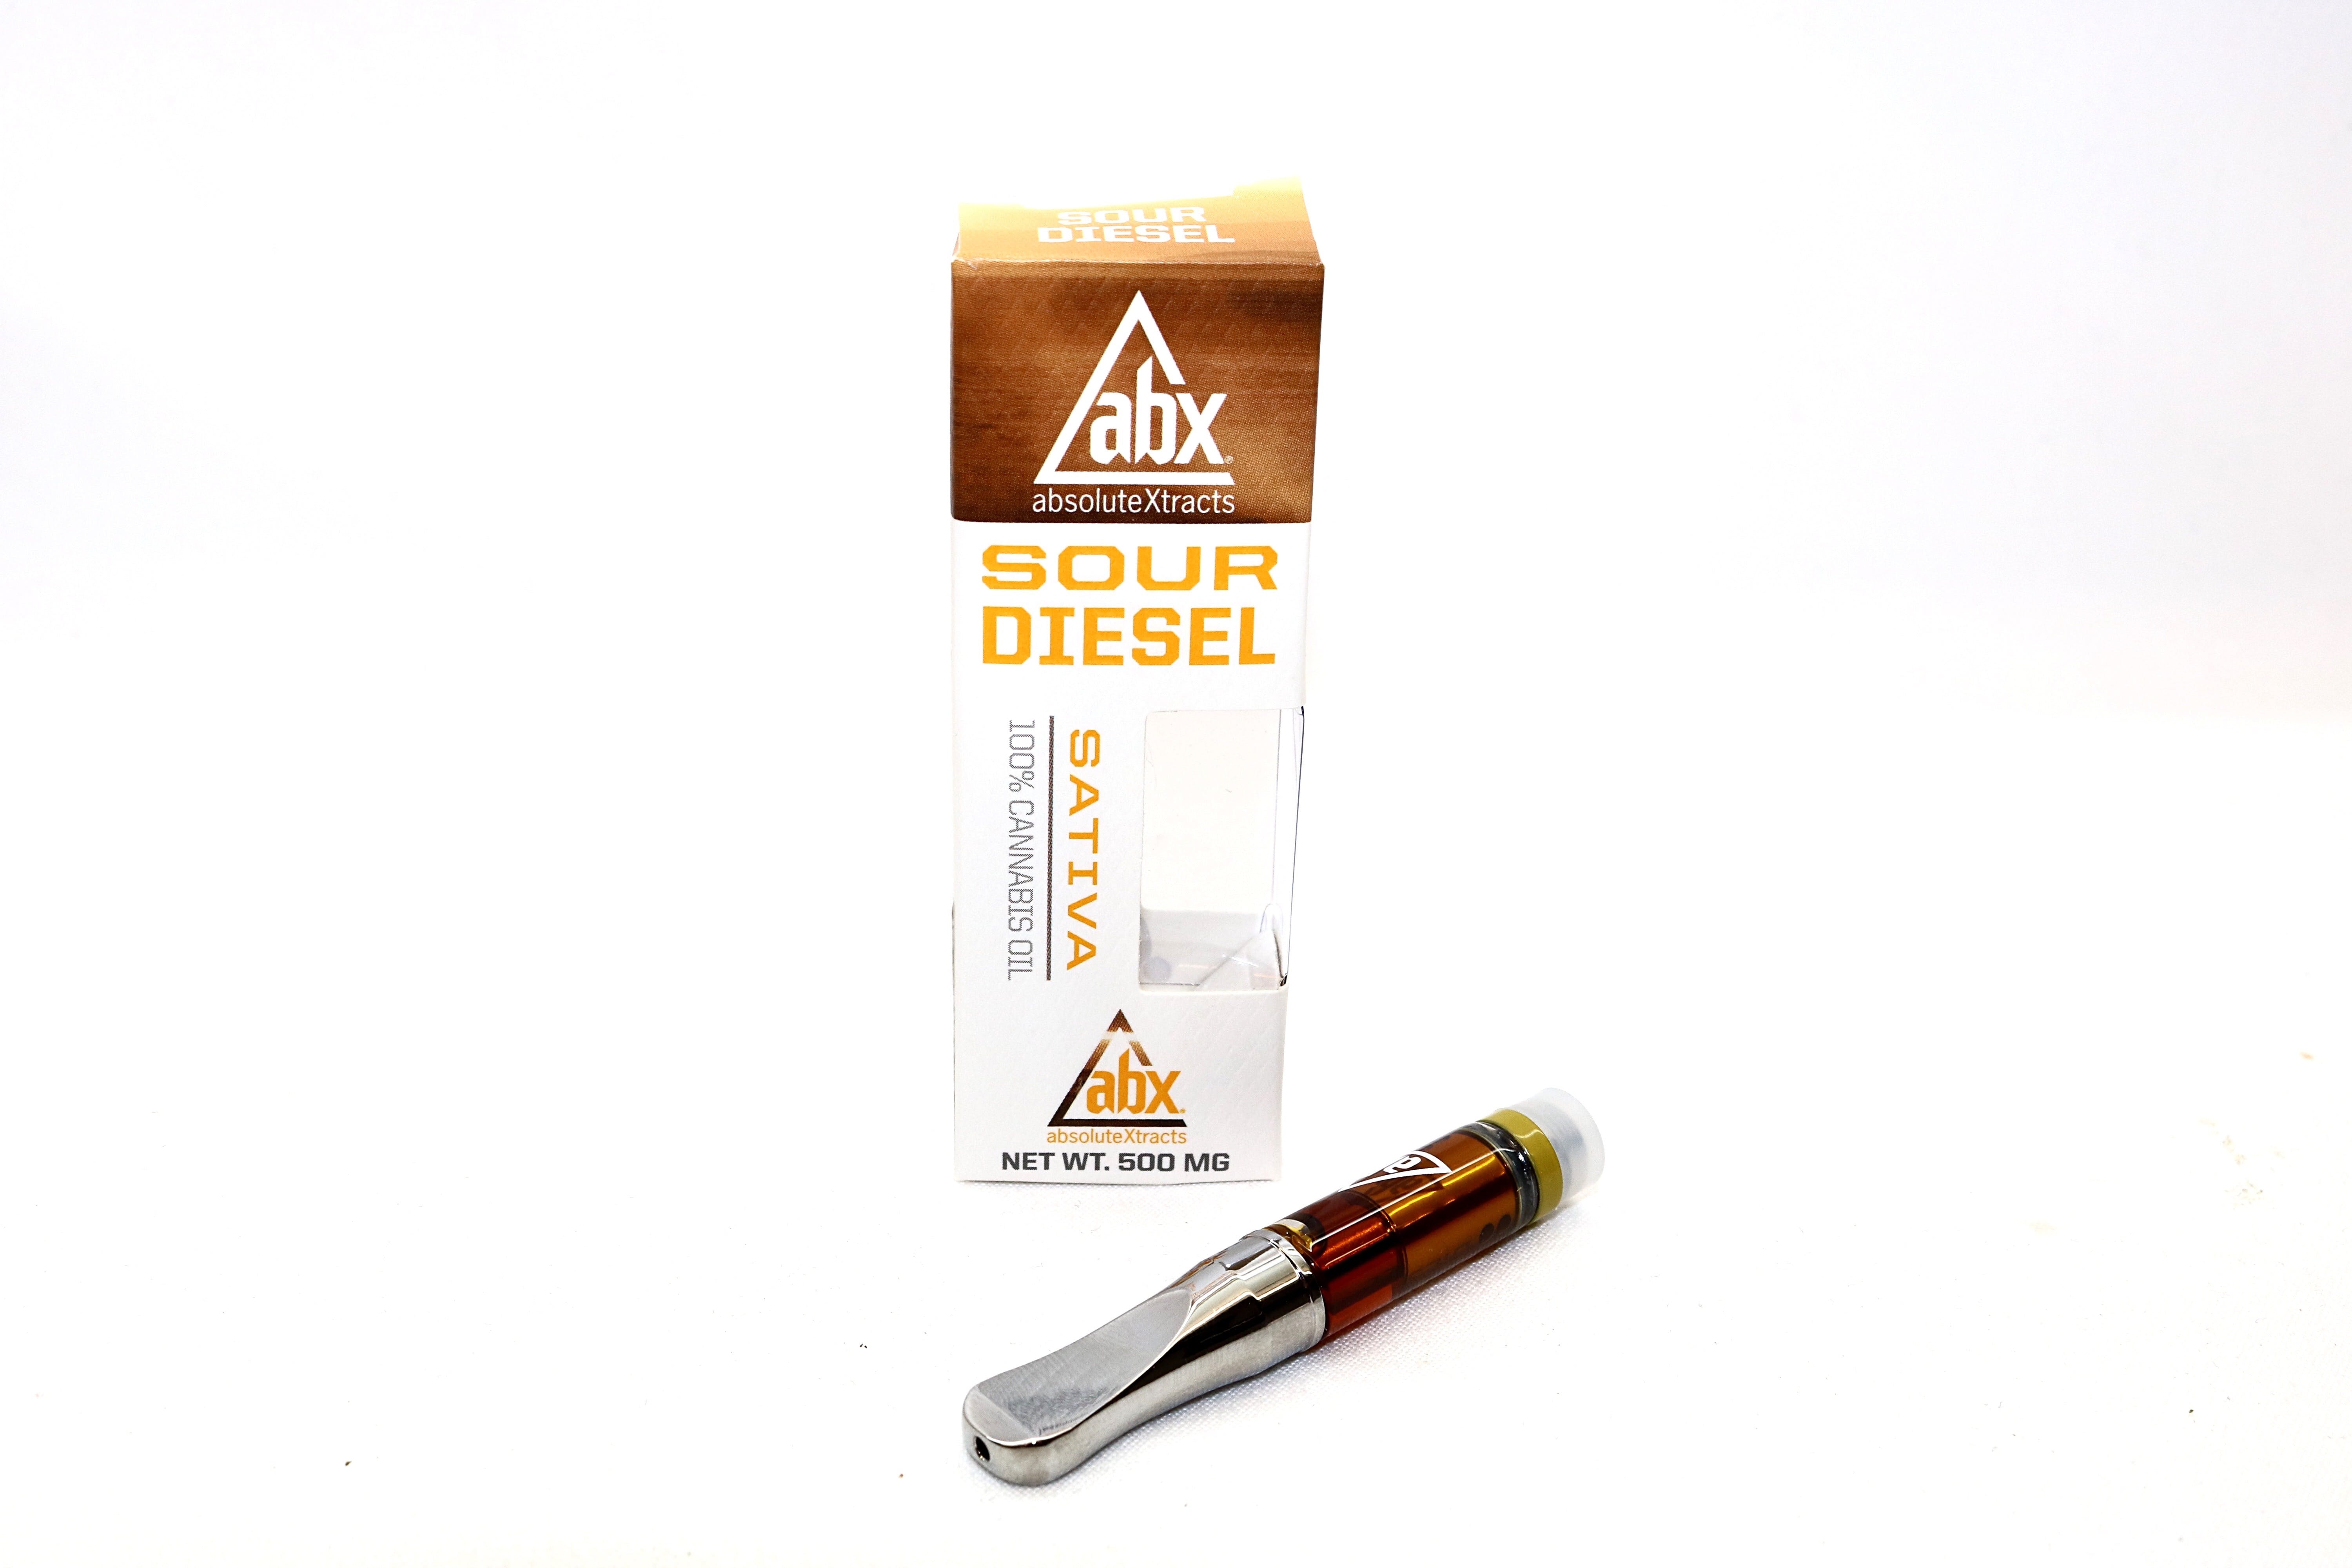 concentrate-absolutextracts-abx-sour-diesel-vape-cartridge-500mg